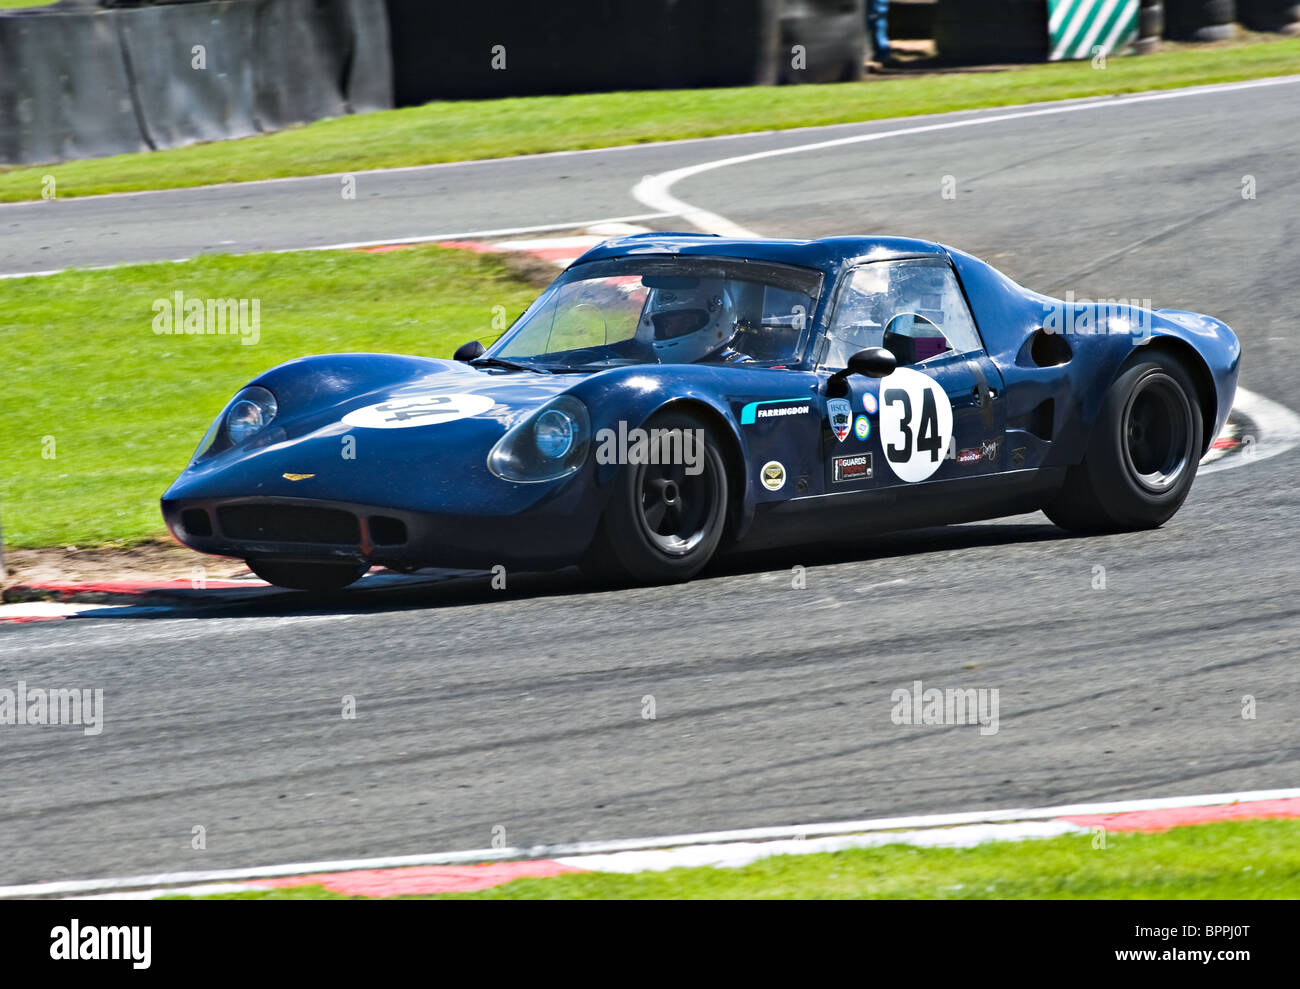 Chevron B8 Sports Racing Car in Guards Trophy Race at Oulton Park Motor Racing Circuit Cheshire England United Kingdom UK Stock Photo